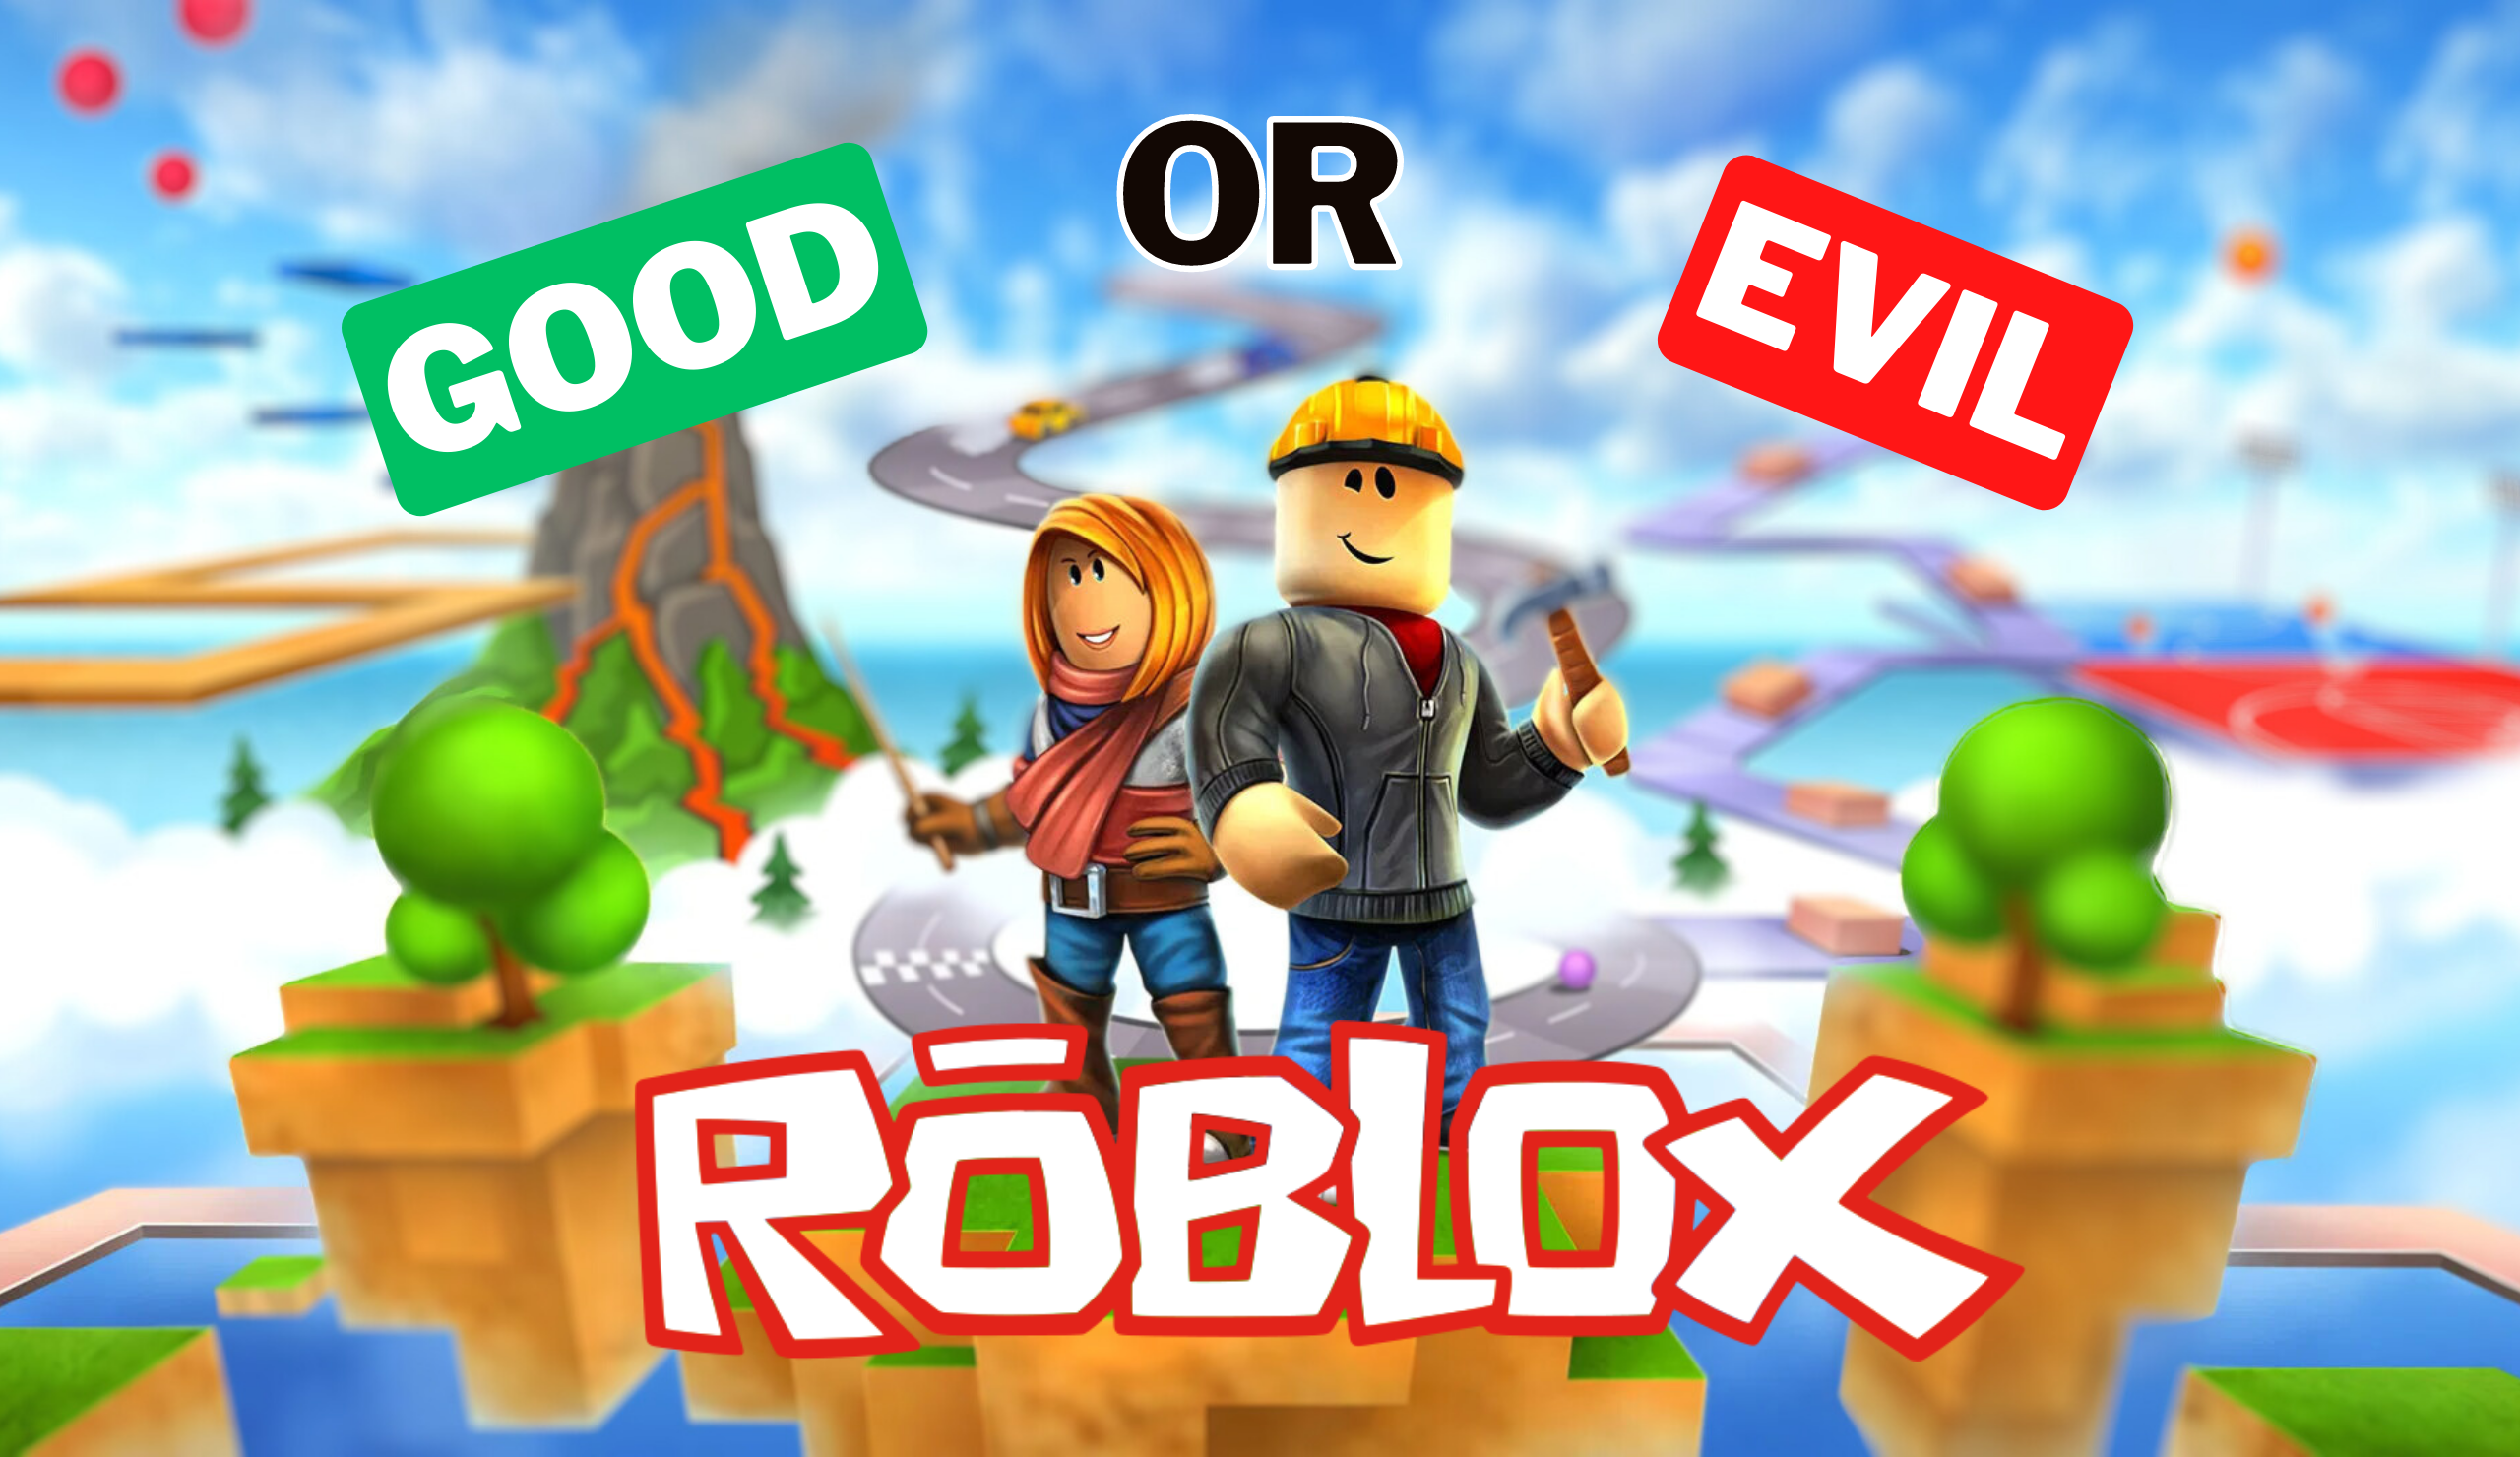 Roblox 101: Adopt Me developer's tips on finding success